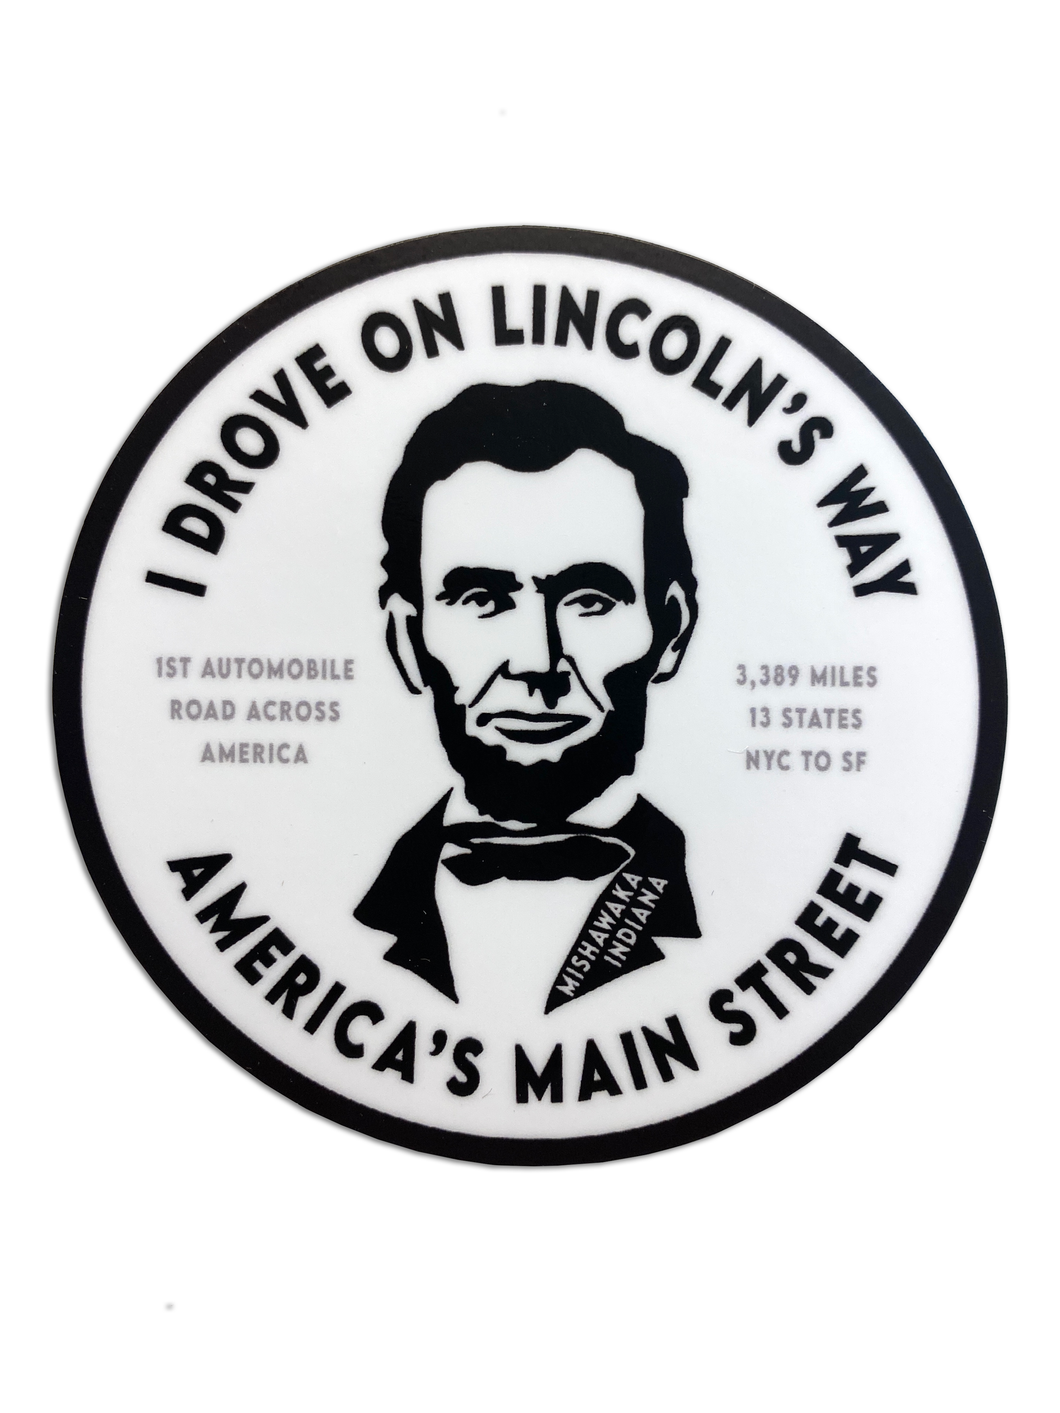 Lincolnway highway sticker